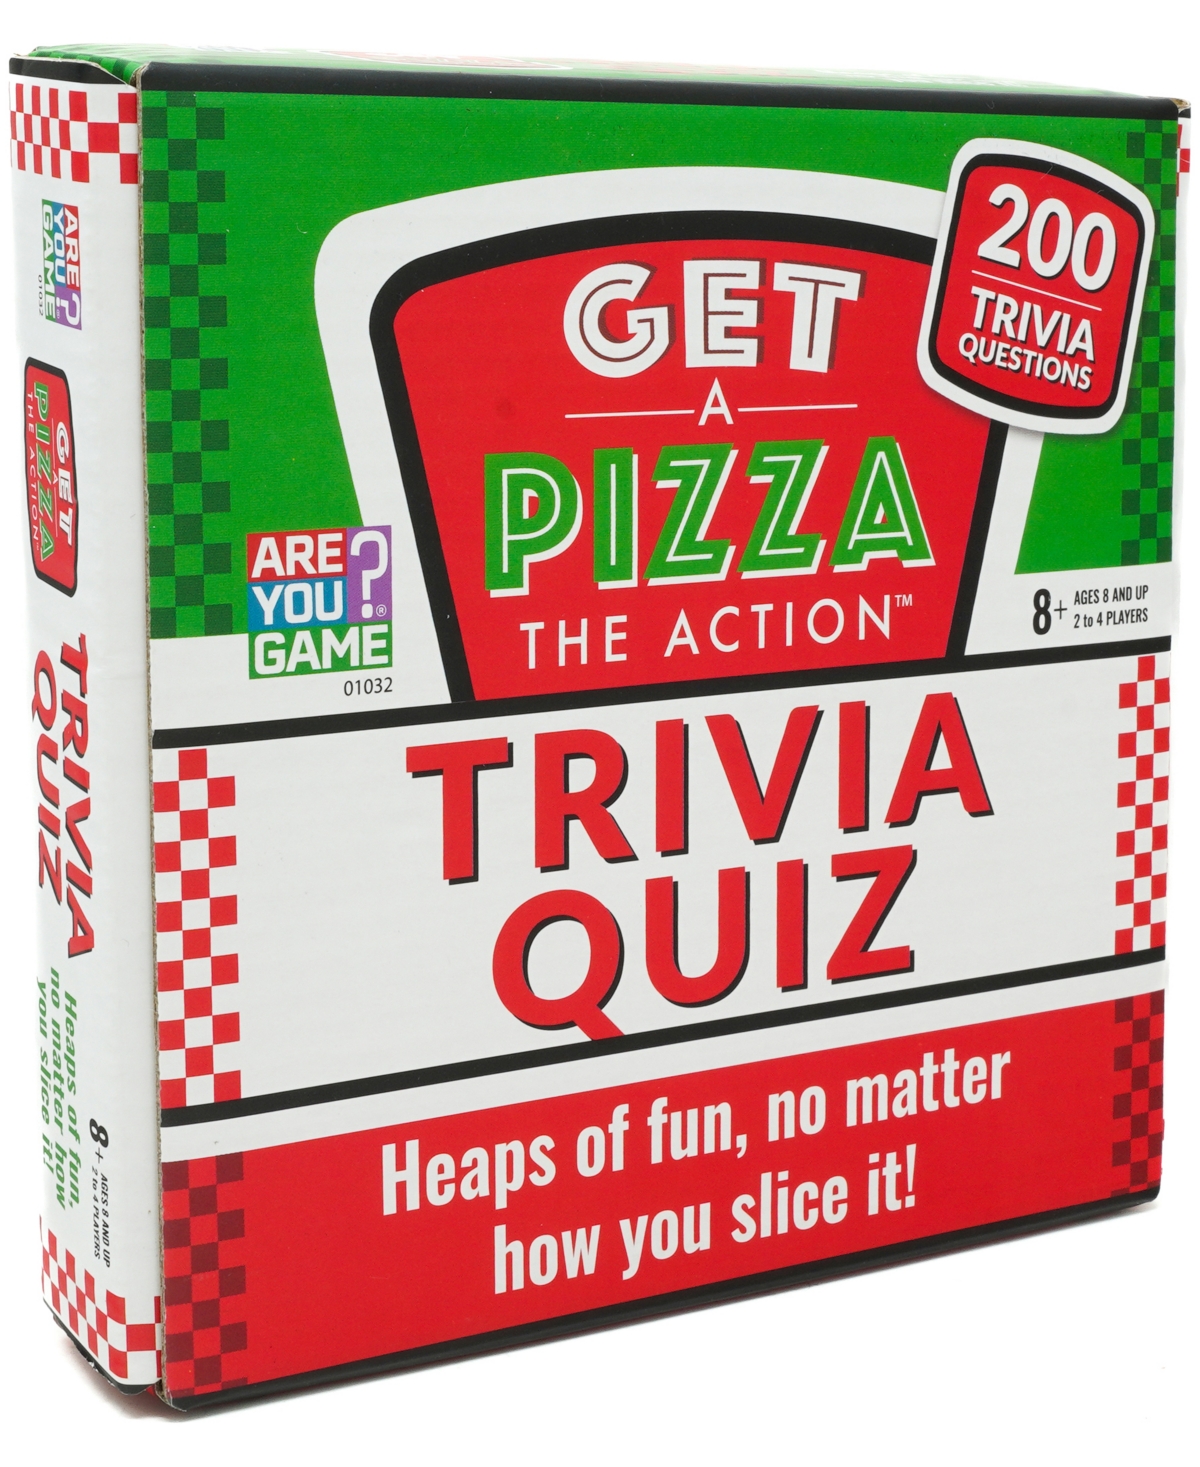 University Games Areyougame.com Get A Pizza The Action Trivia Quiz In No Color